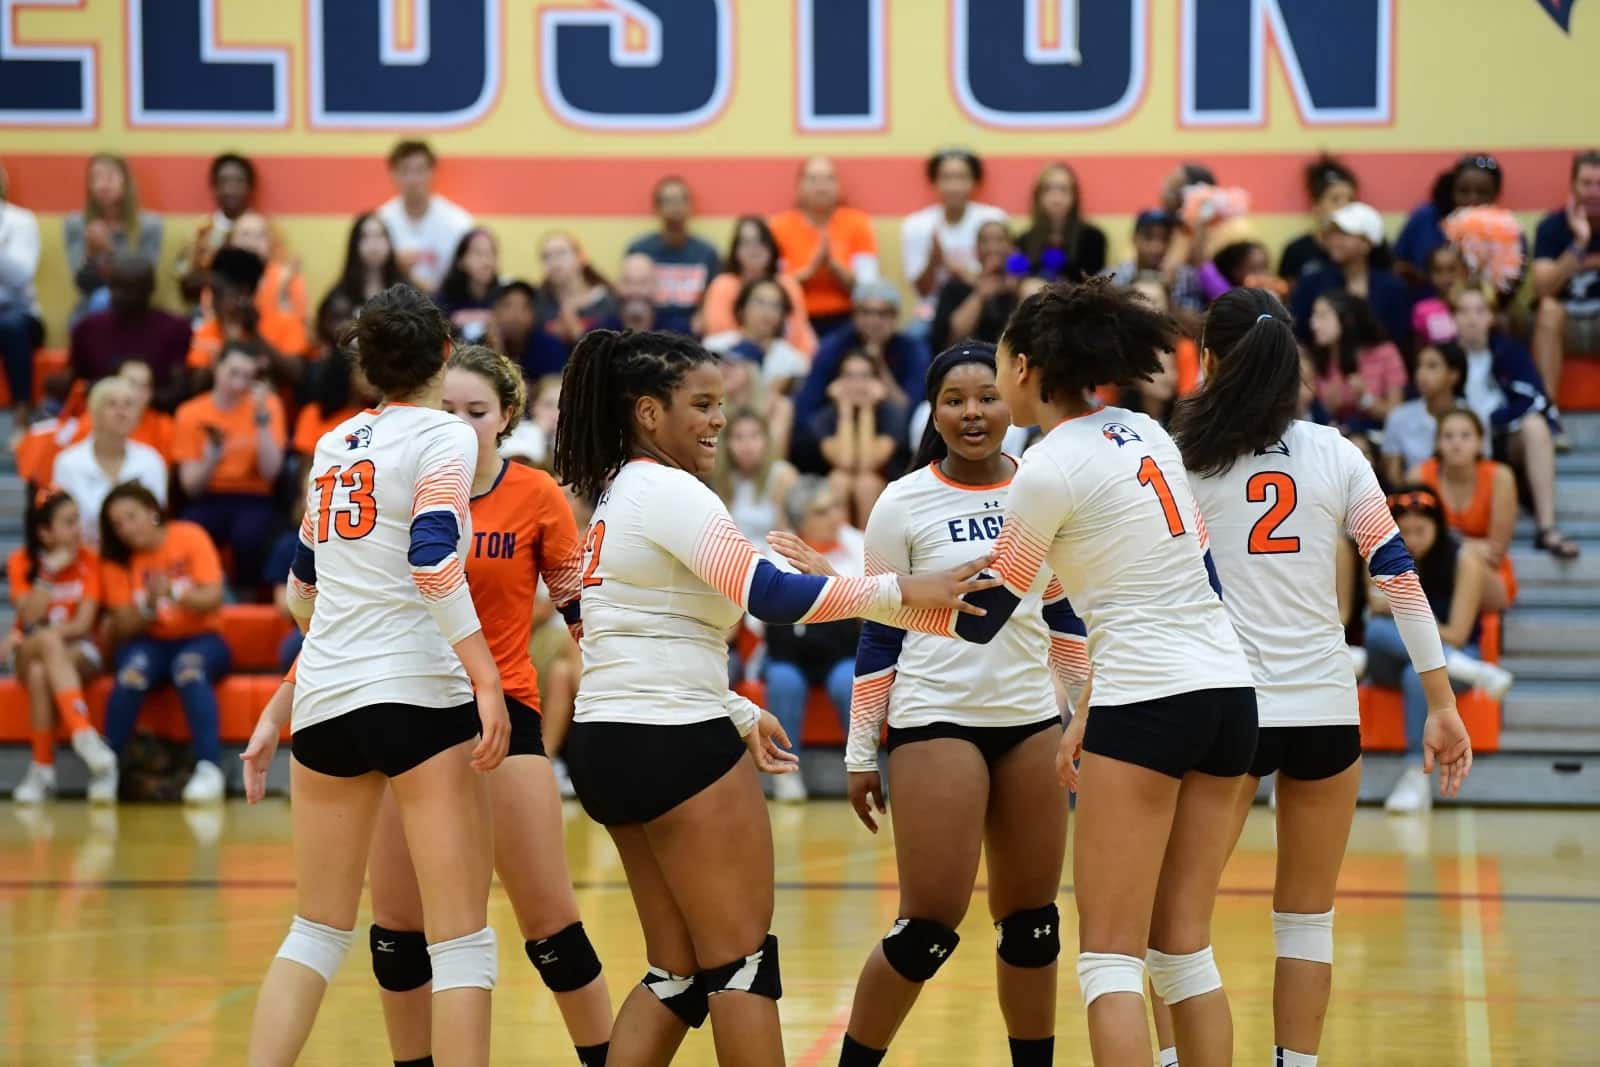 Girls varsity volleyball players cheer in celebration on court